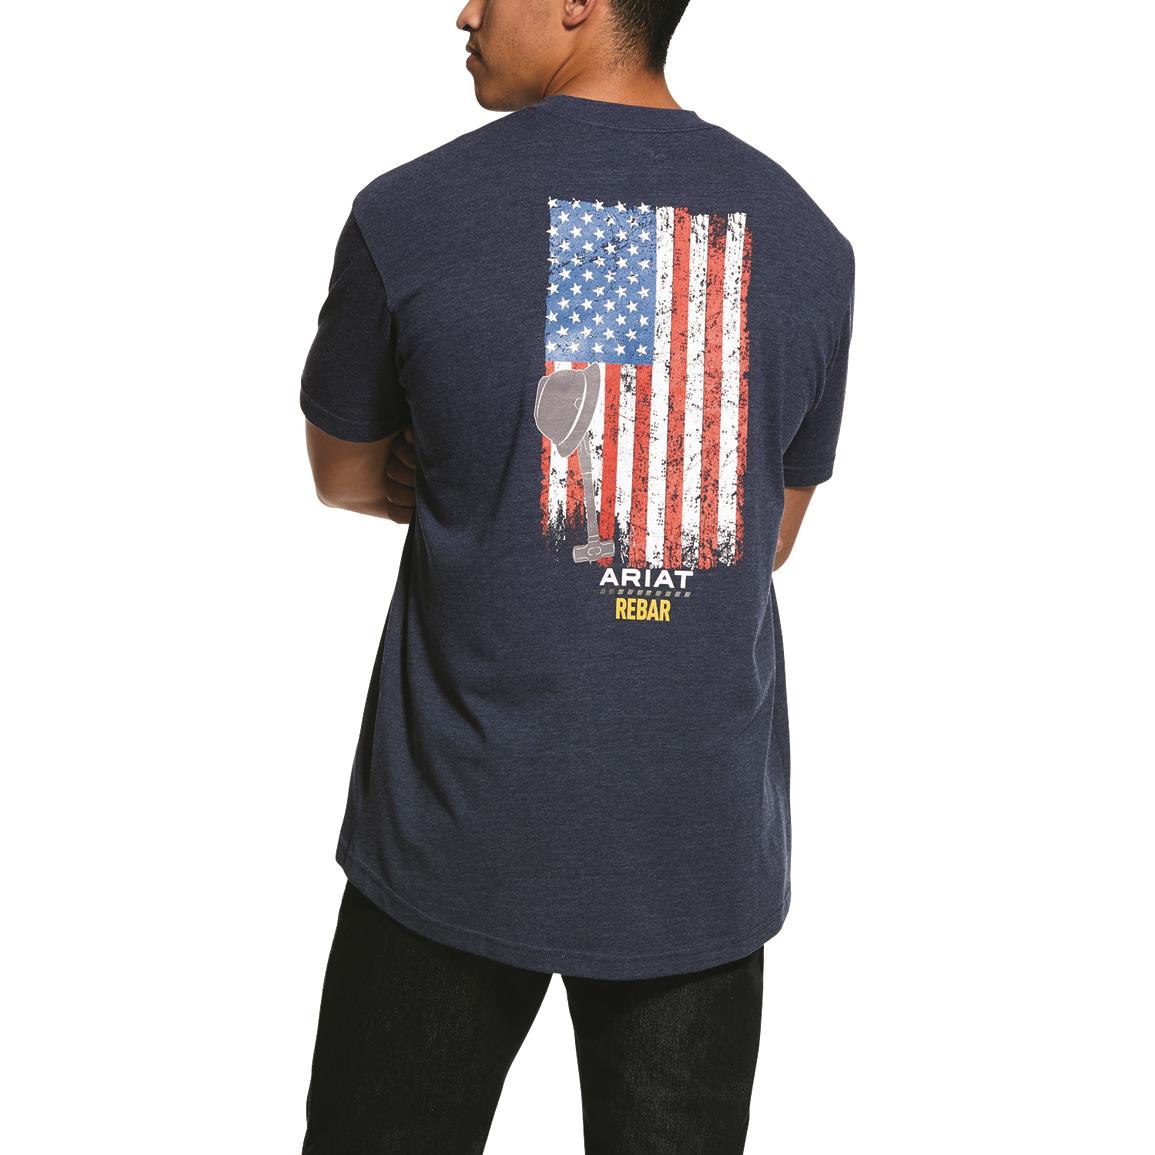 Graphic on back, Navy Heather